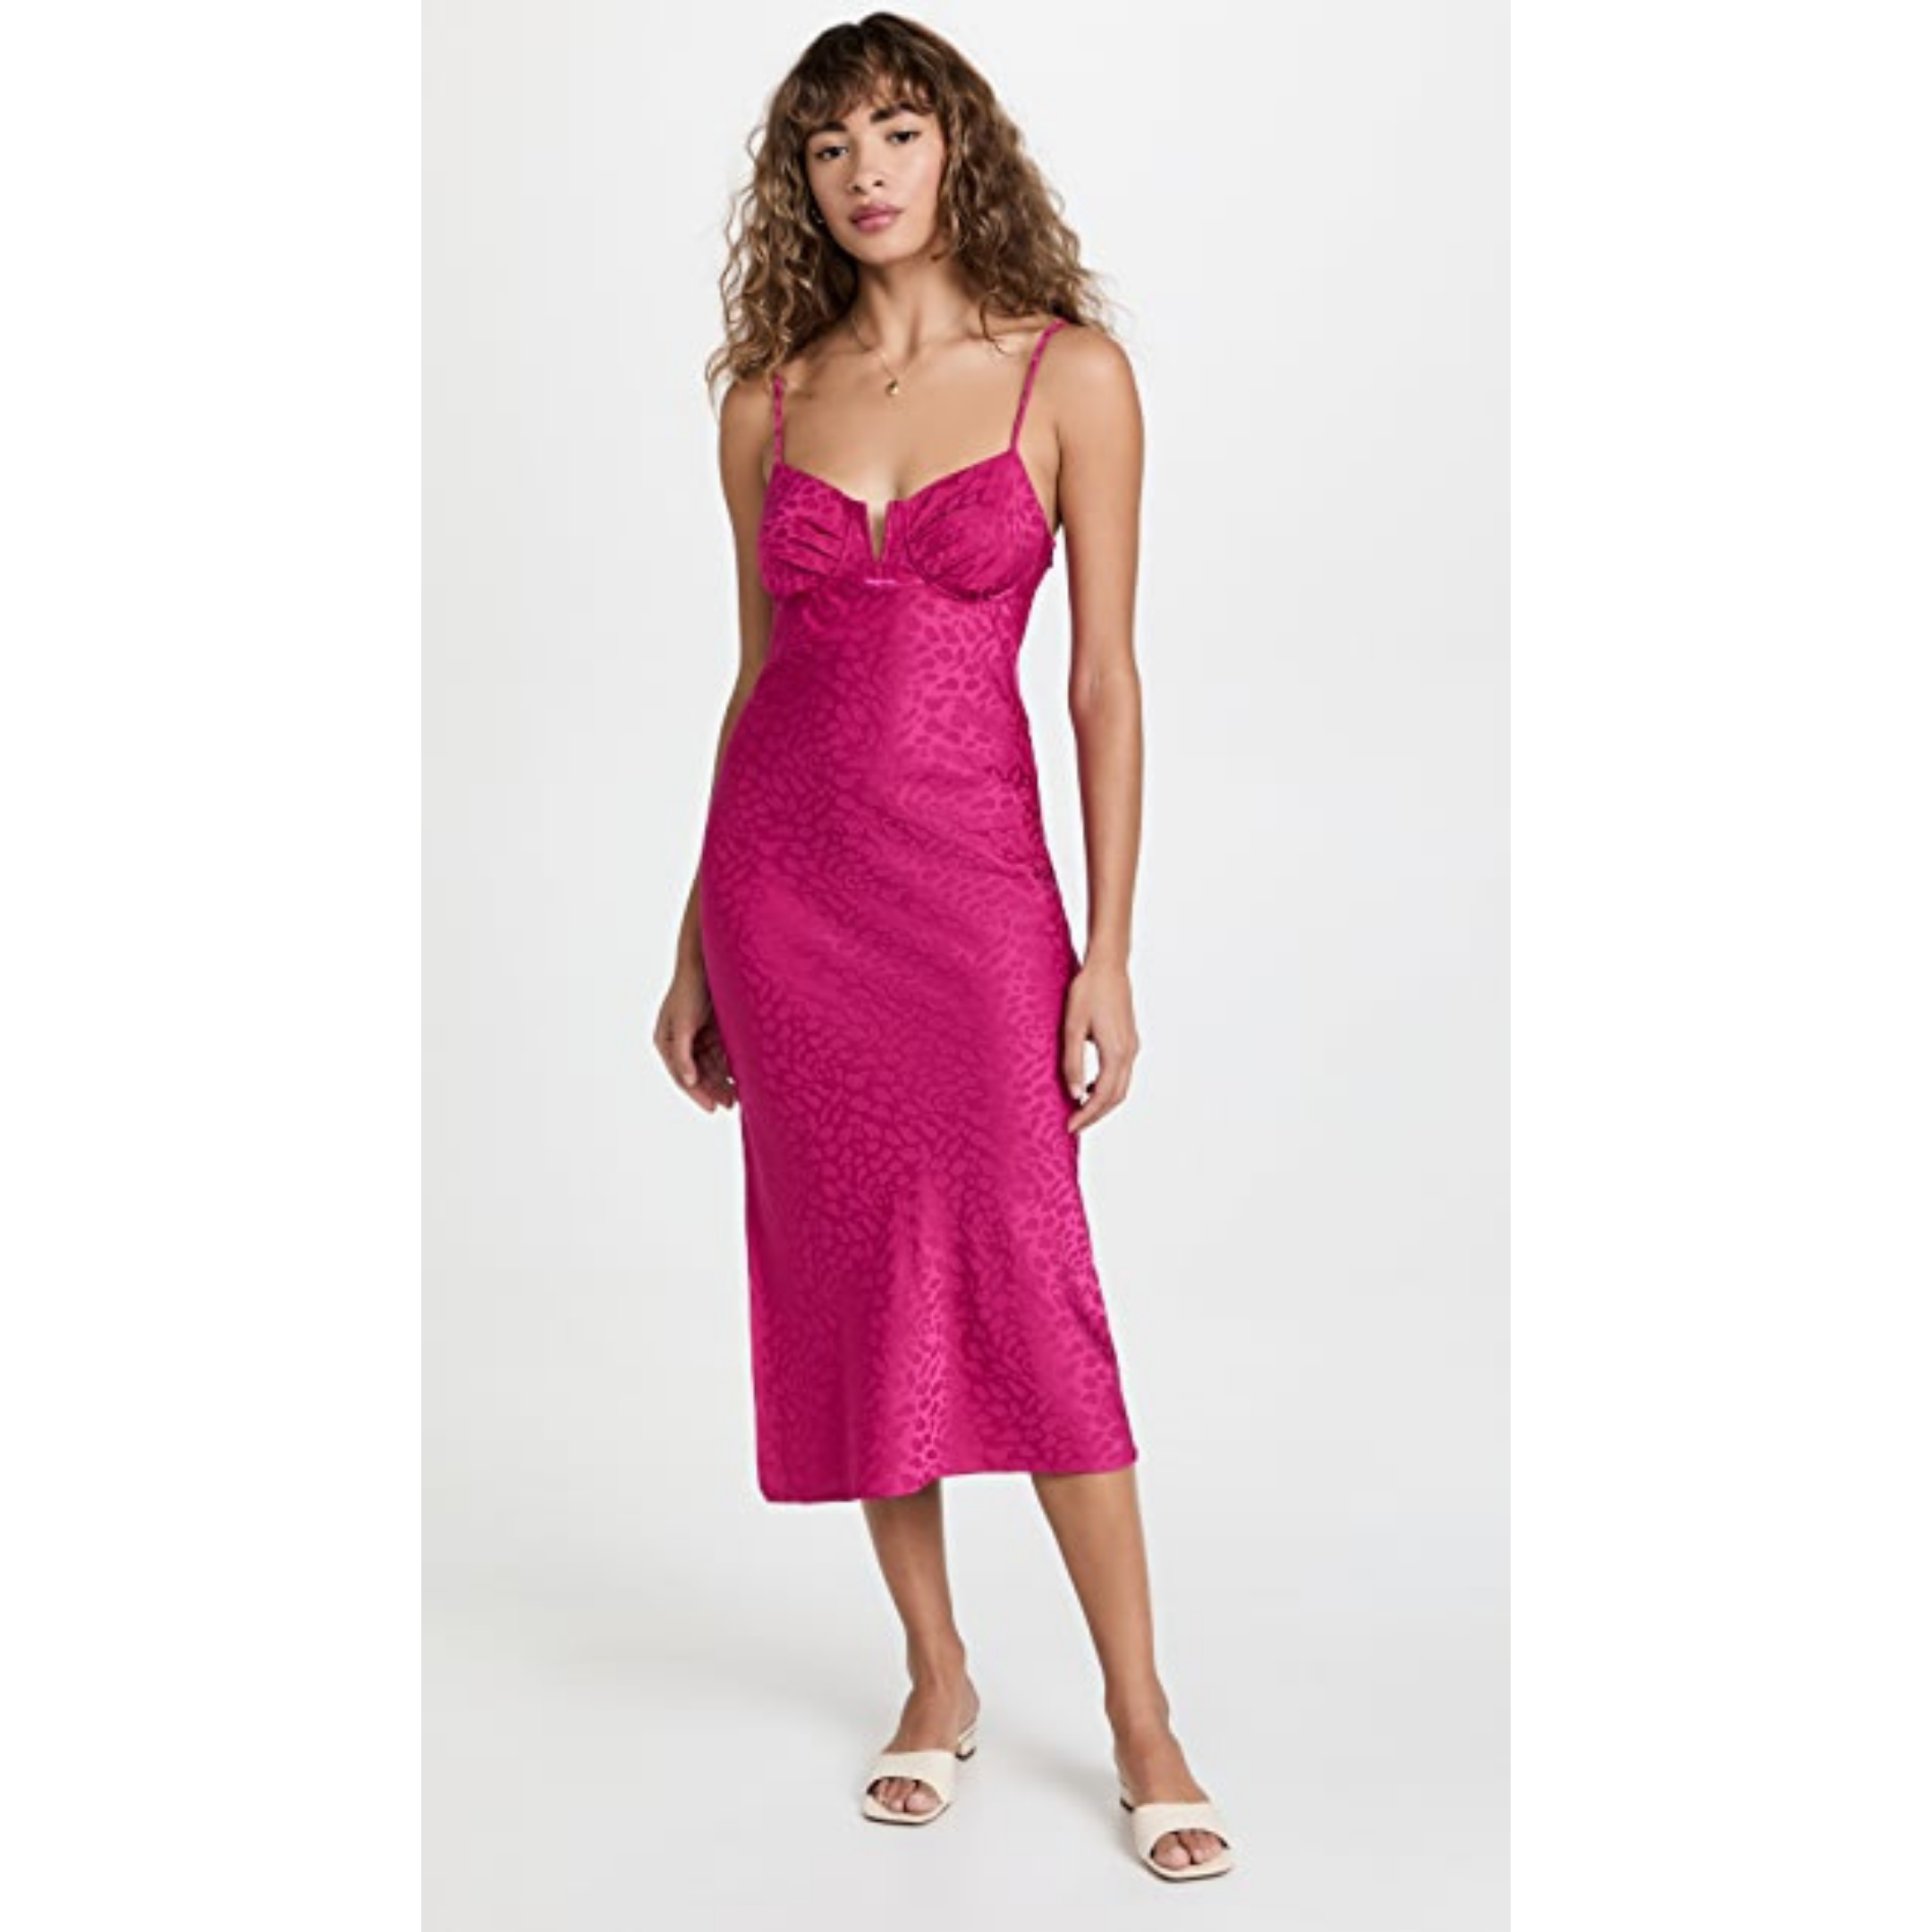 Under $100 Dresses You Need For Valentine's (Or Galentine's) Day